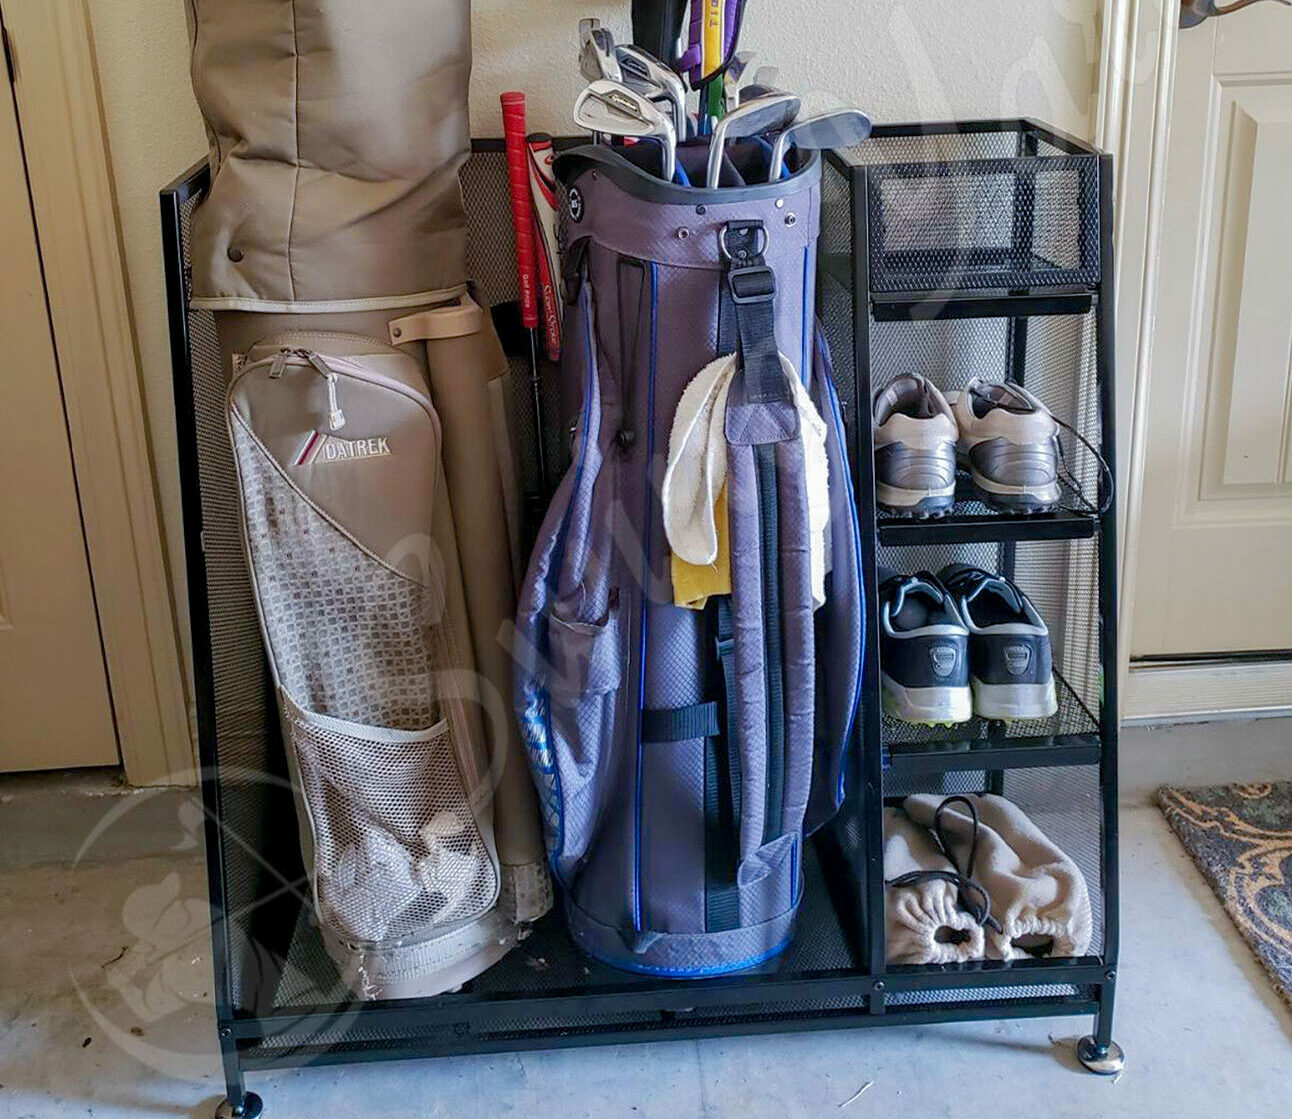 A Milliard Golf Organizer setup in the living room